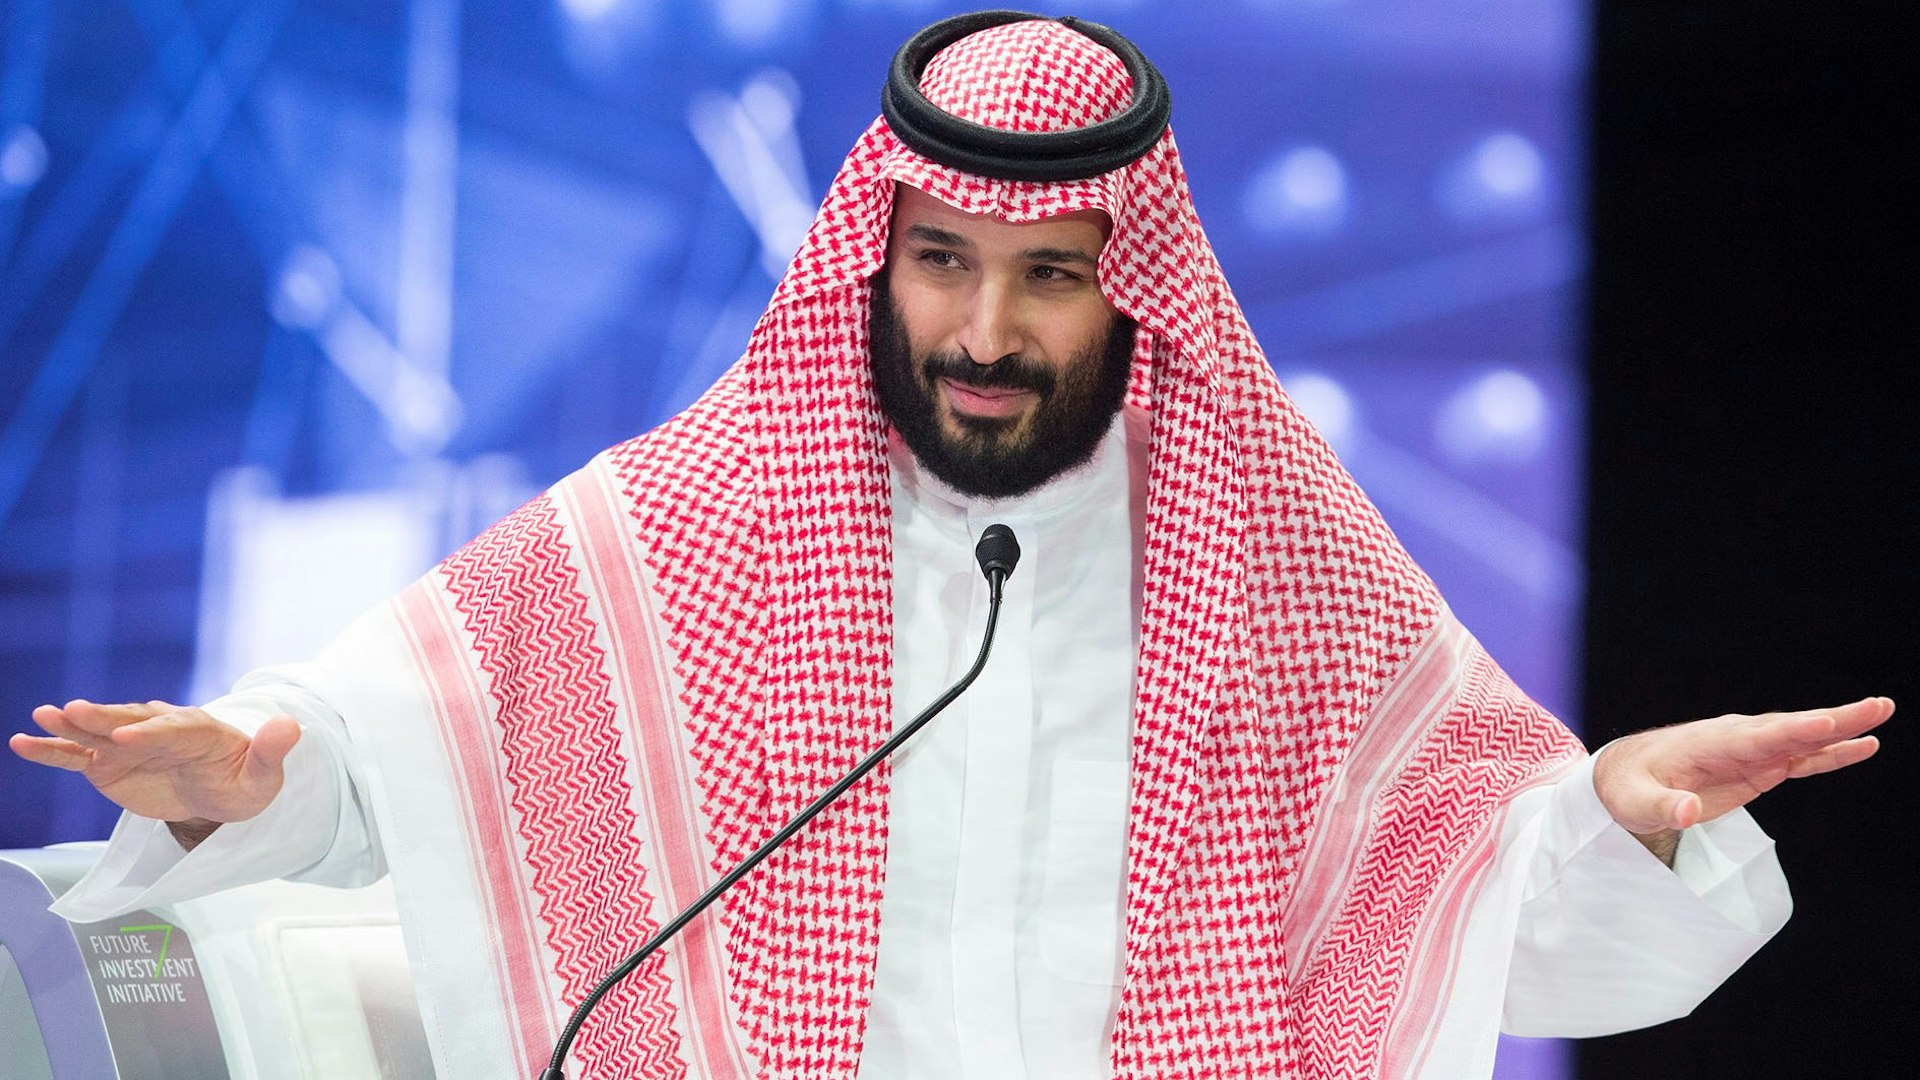 RIYADH, SAUDI ARABIA - OCTOBER 24: (----EDITORIAL USE ONLY MANDATORY CREDIT - "BANDAR ALGALOUD / SAUDI KINGDOM COUNCIL / HANDOUT" - NO MARKETING NO ADVERTISING CAMPAIGNS - DISTRIBUTED AS A SERVICE TO CLIENTS----) Crown Prince of Saudi Arabia Mohammad bin Salman speaks during the second day of 'The Future Investment Initiative also known as an annual investment forum "Davos in the Desert" on October 24, 2018 in Riyadh, Saudi Arabia.